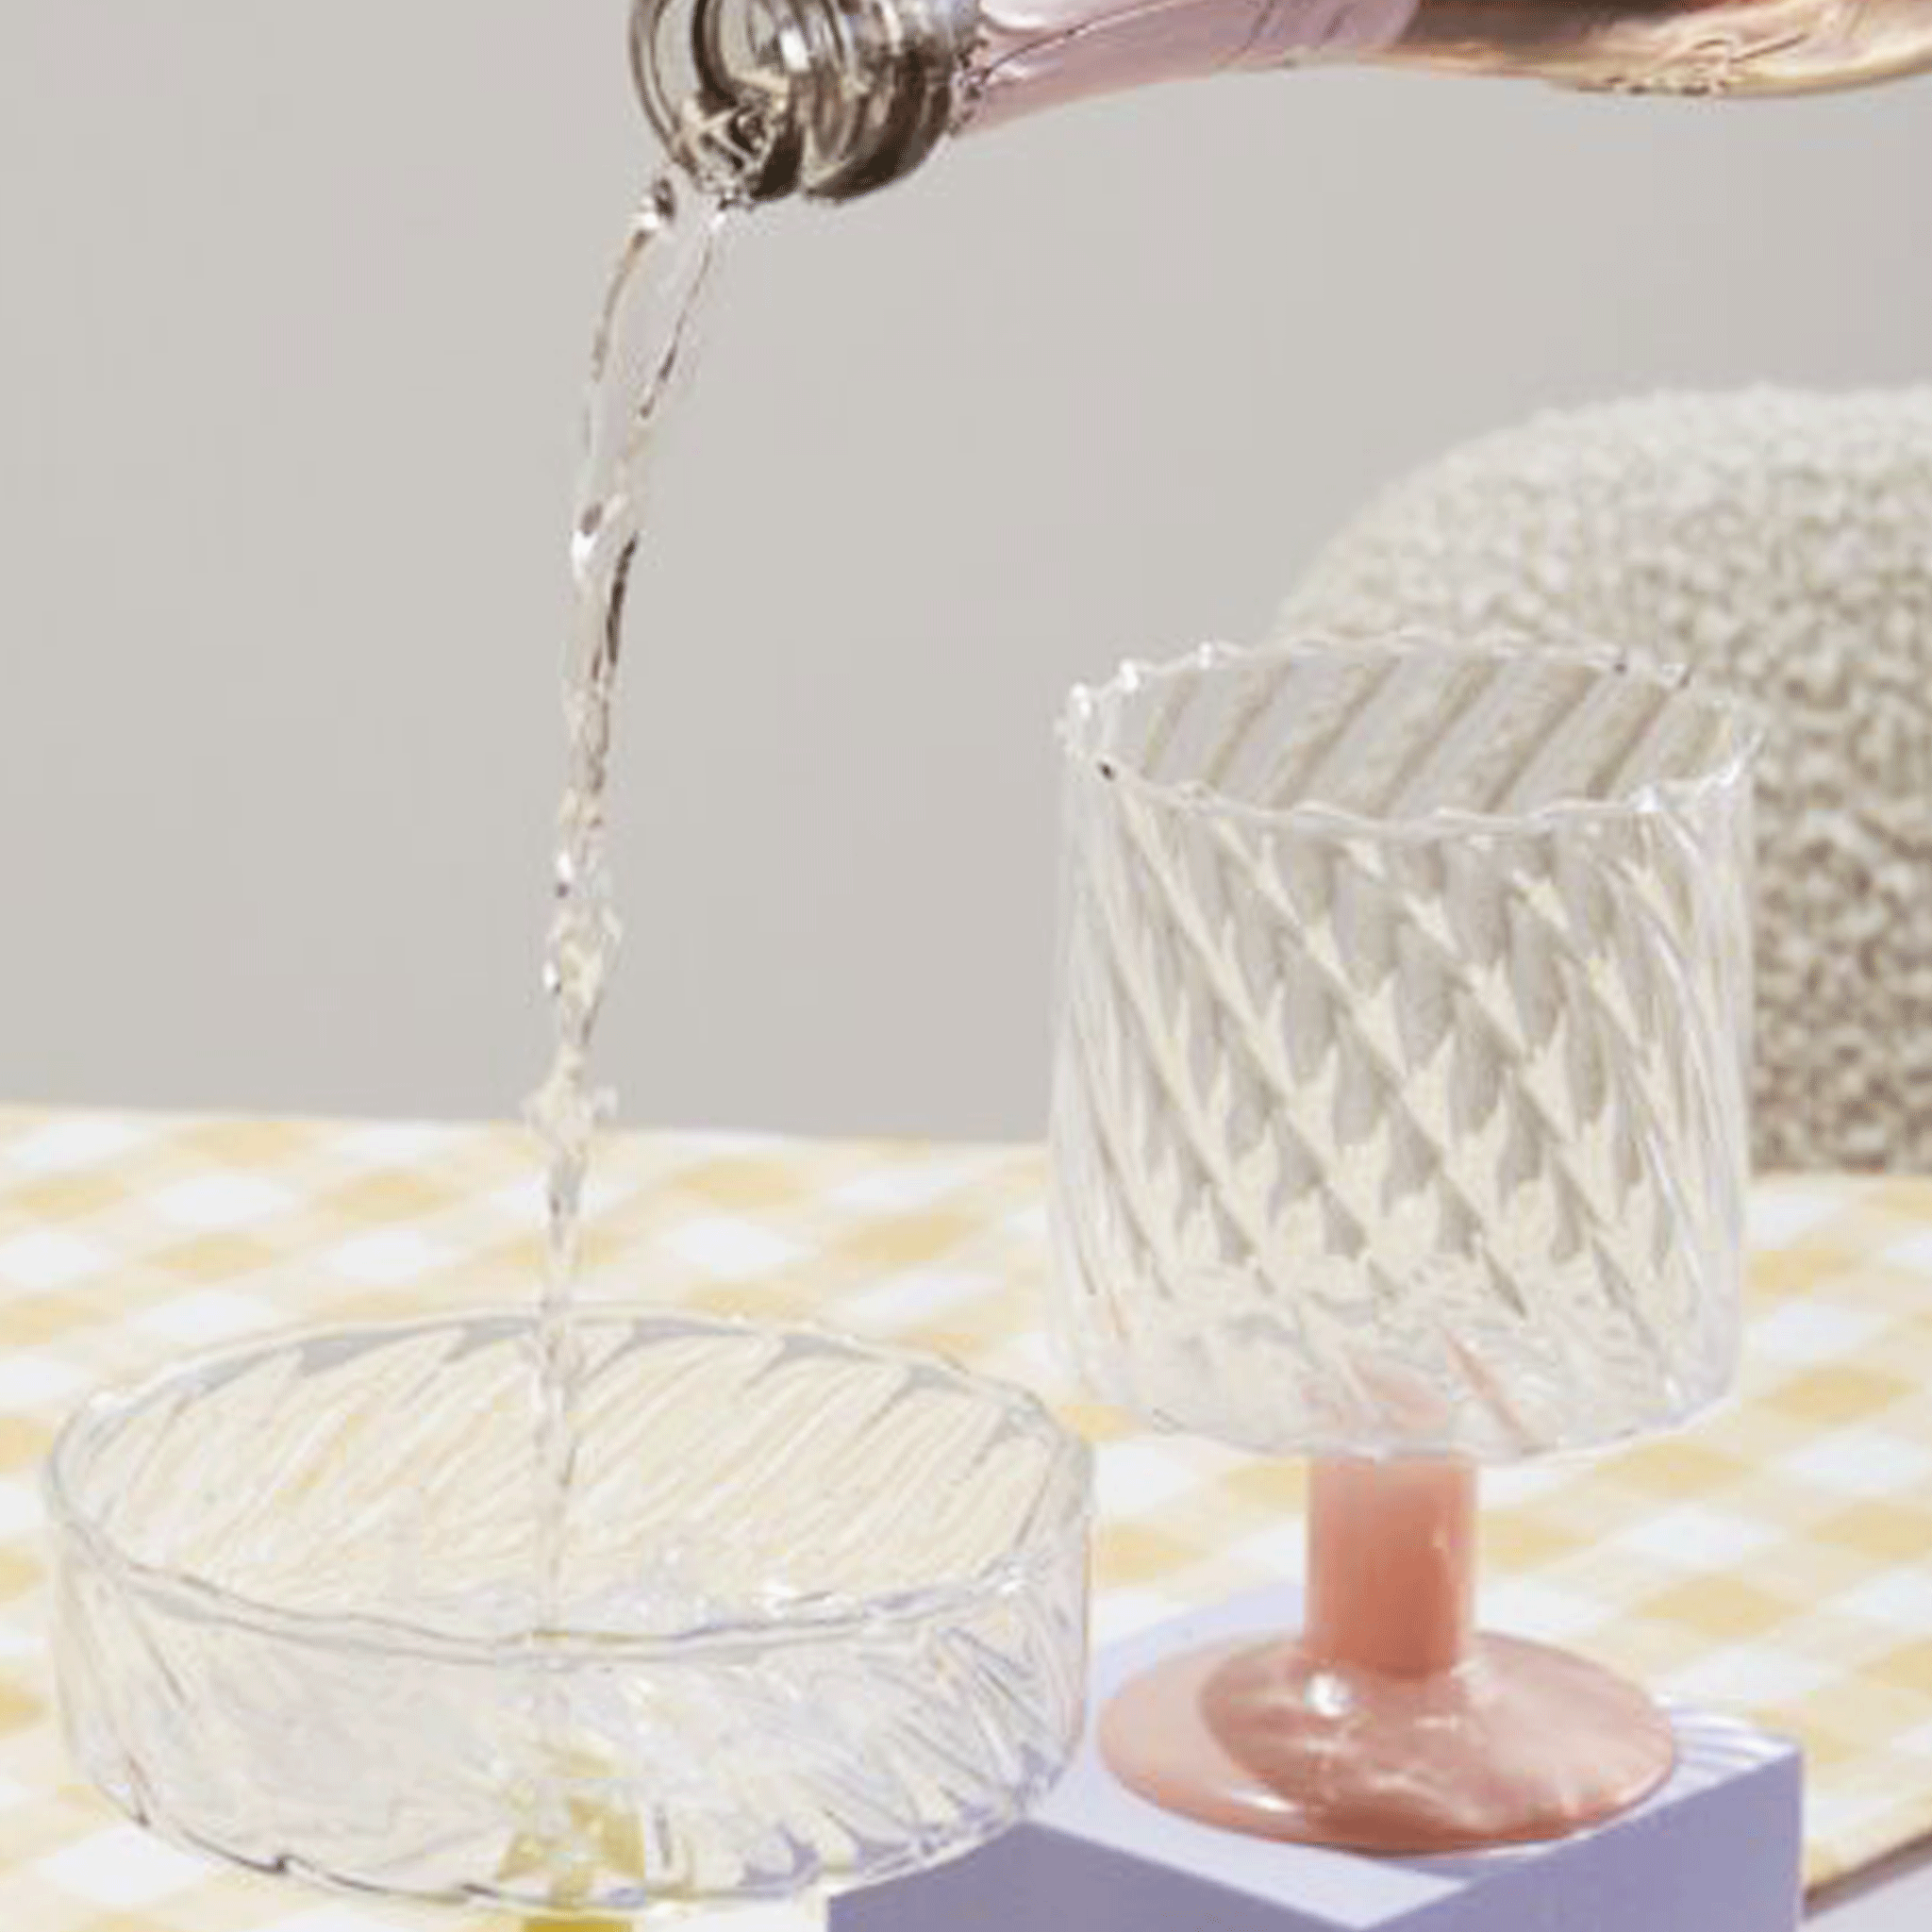 A wavy glass wine glass with a pink short stem.